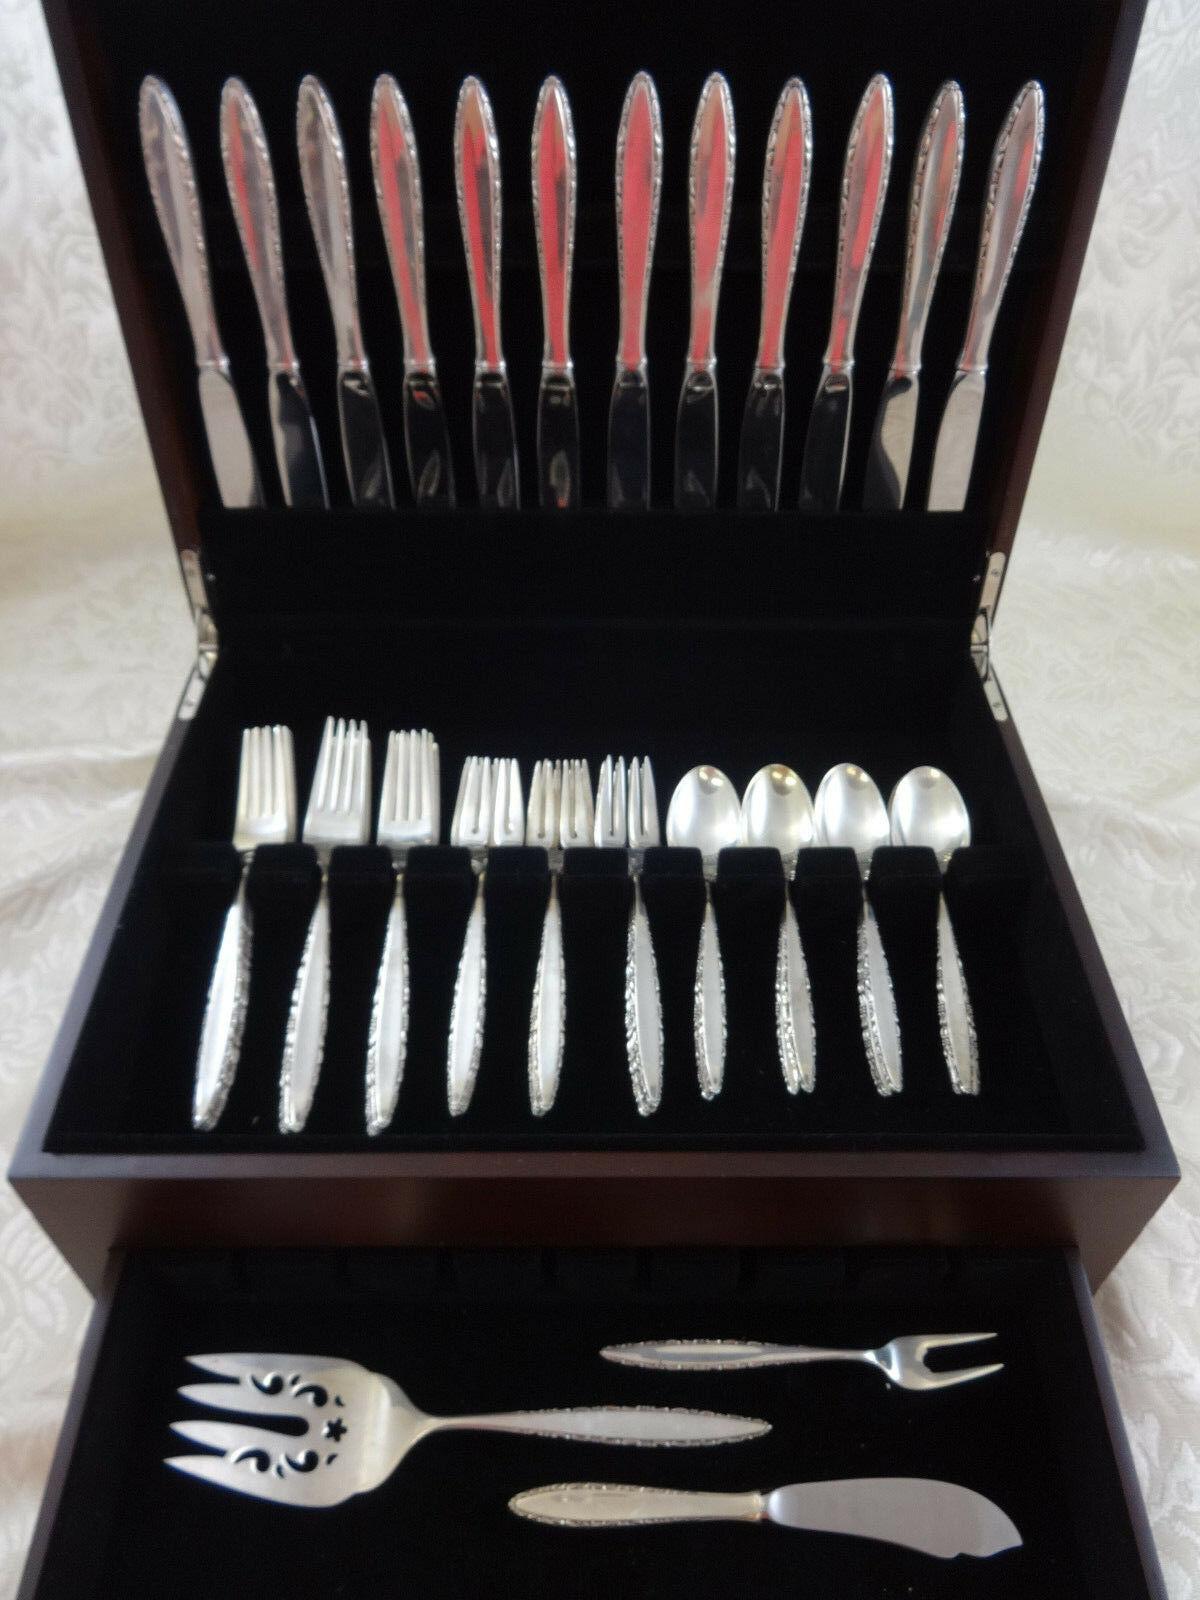 Lace point by Lunt sterling silver flatware set - 51 pieces. This set includes:

12 knives, 9